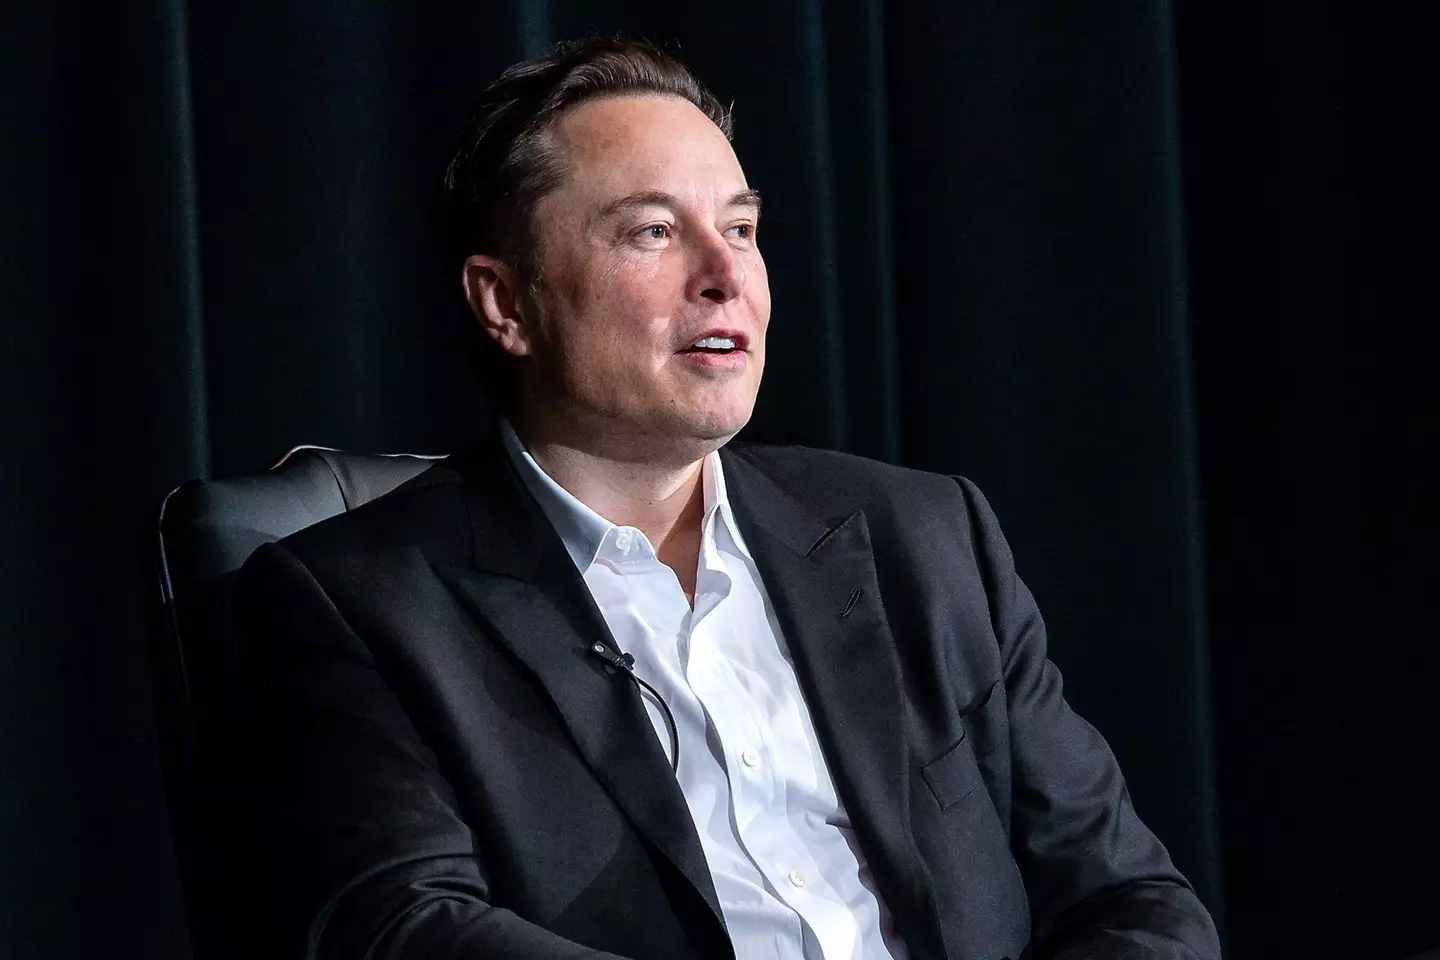 Elon Musk has signed a letter to put a stop to artificial intelligence development.